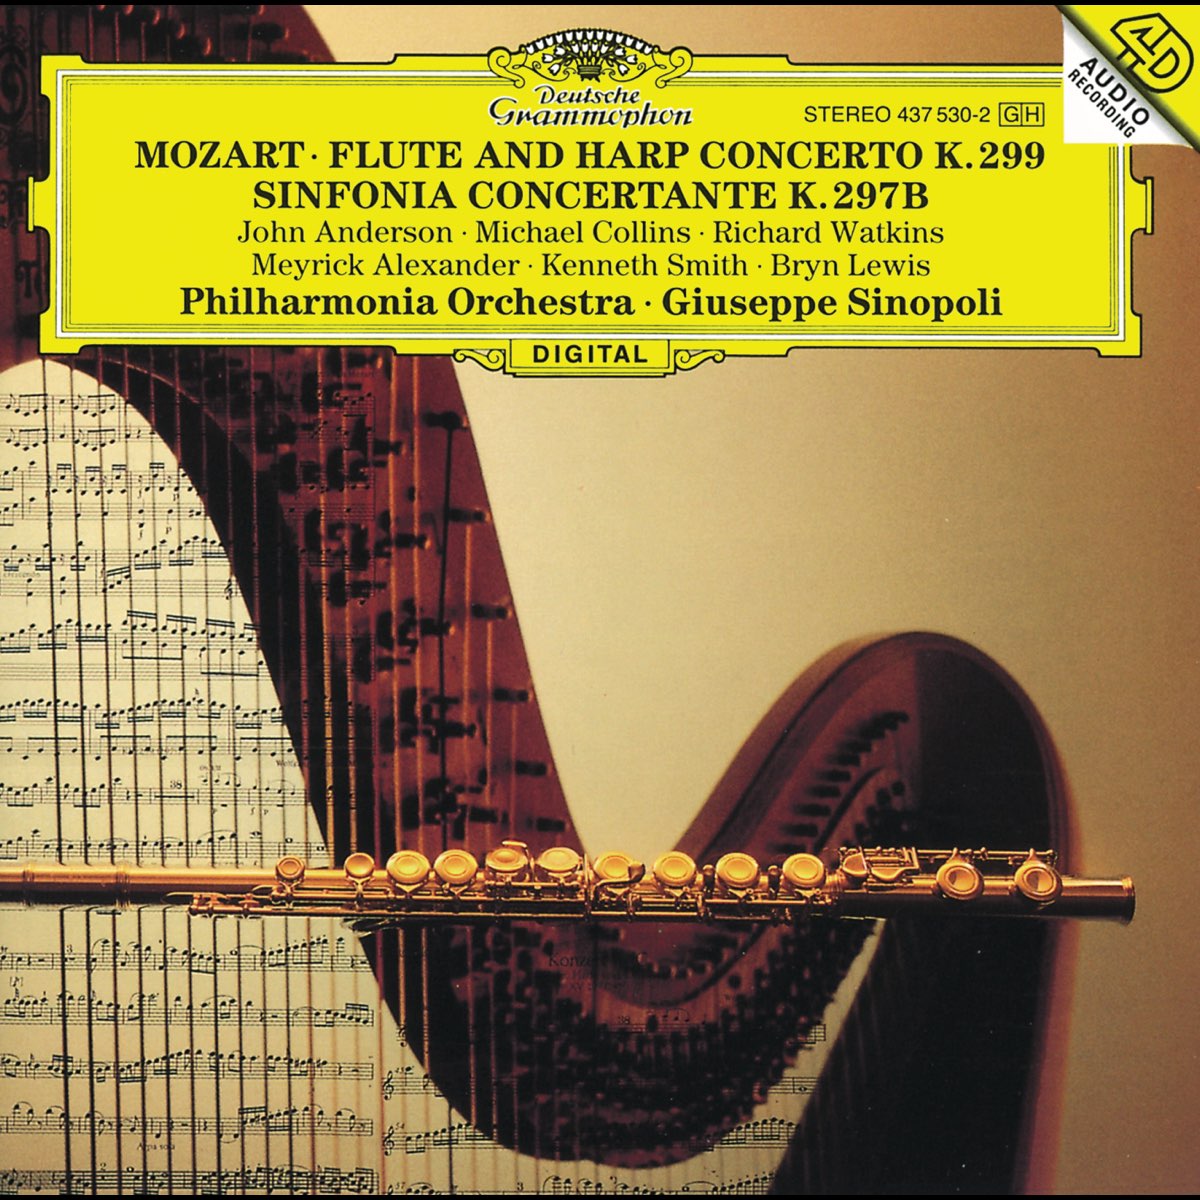 Mozart: Sinfonia Concertante. Mozart Flute Harp CD. Concert b dur for Horn and Orchestra. Concertos for Oboe and Flute. Flute concertos